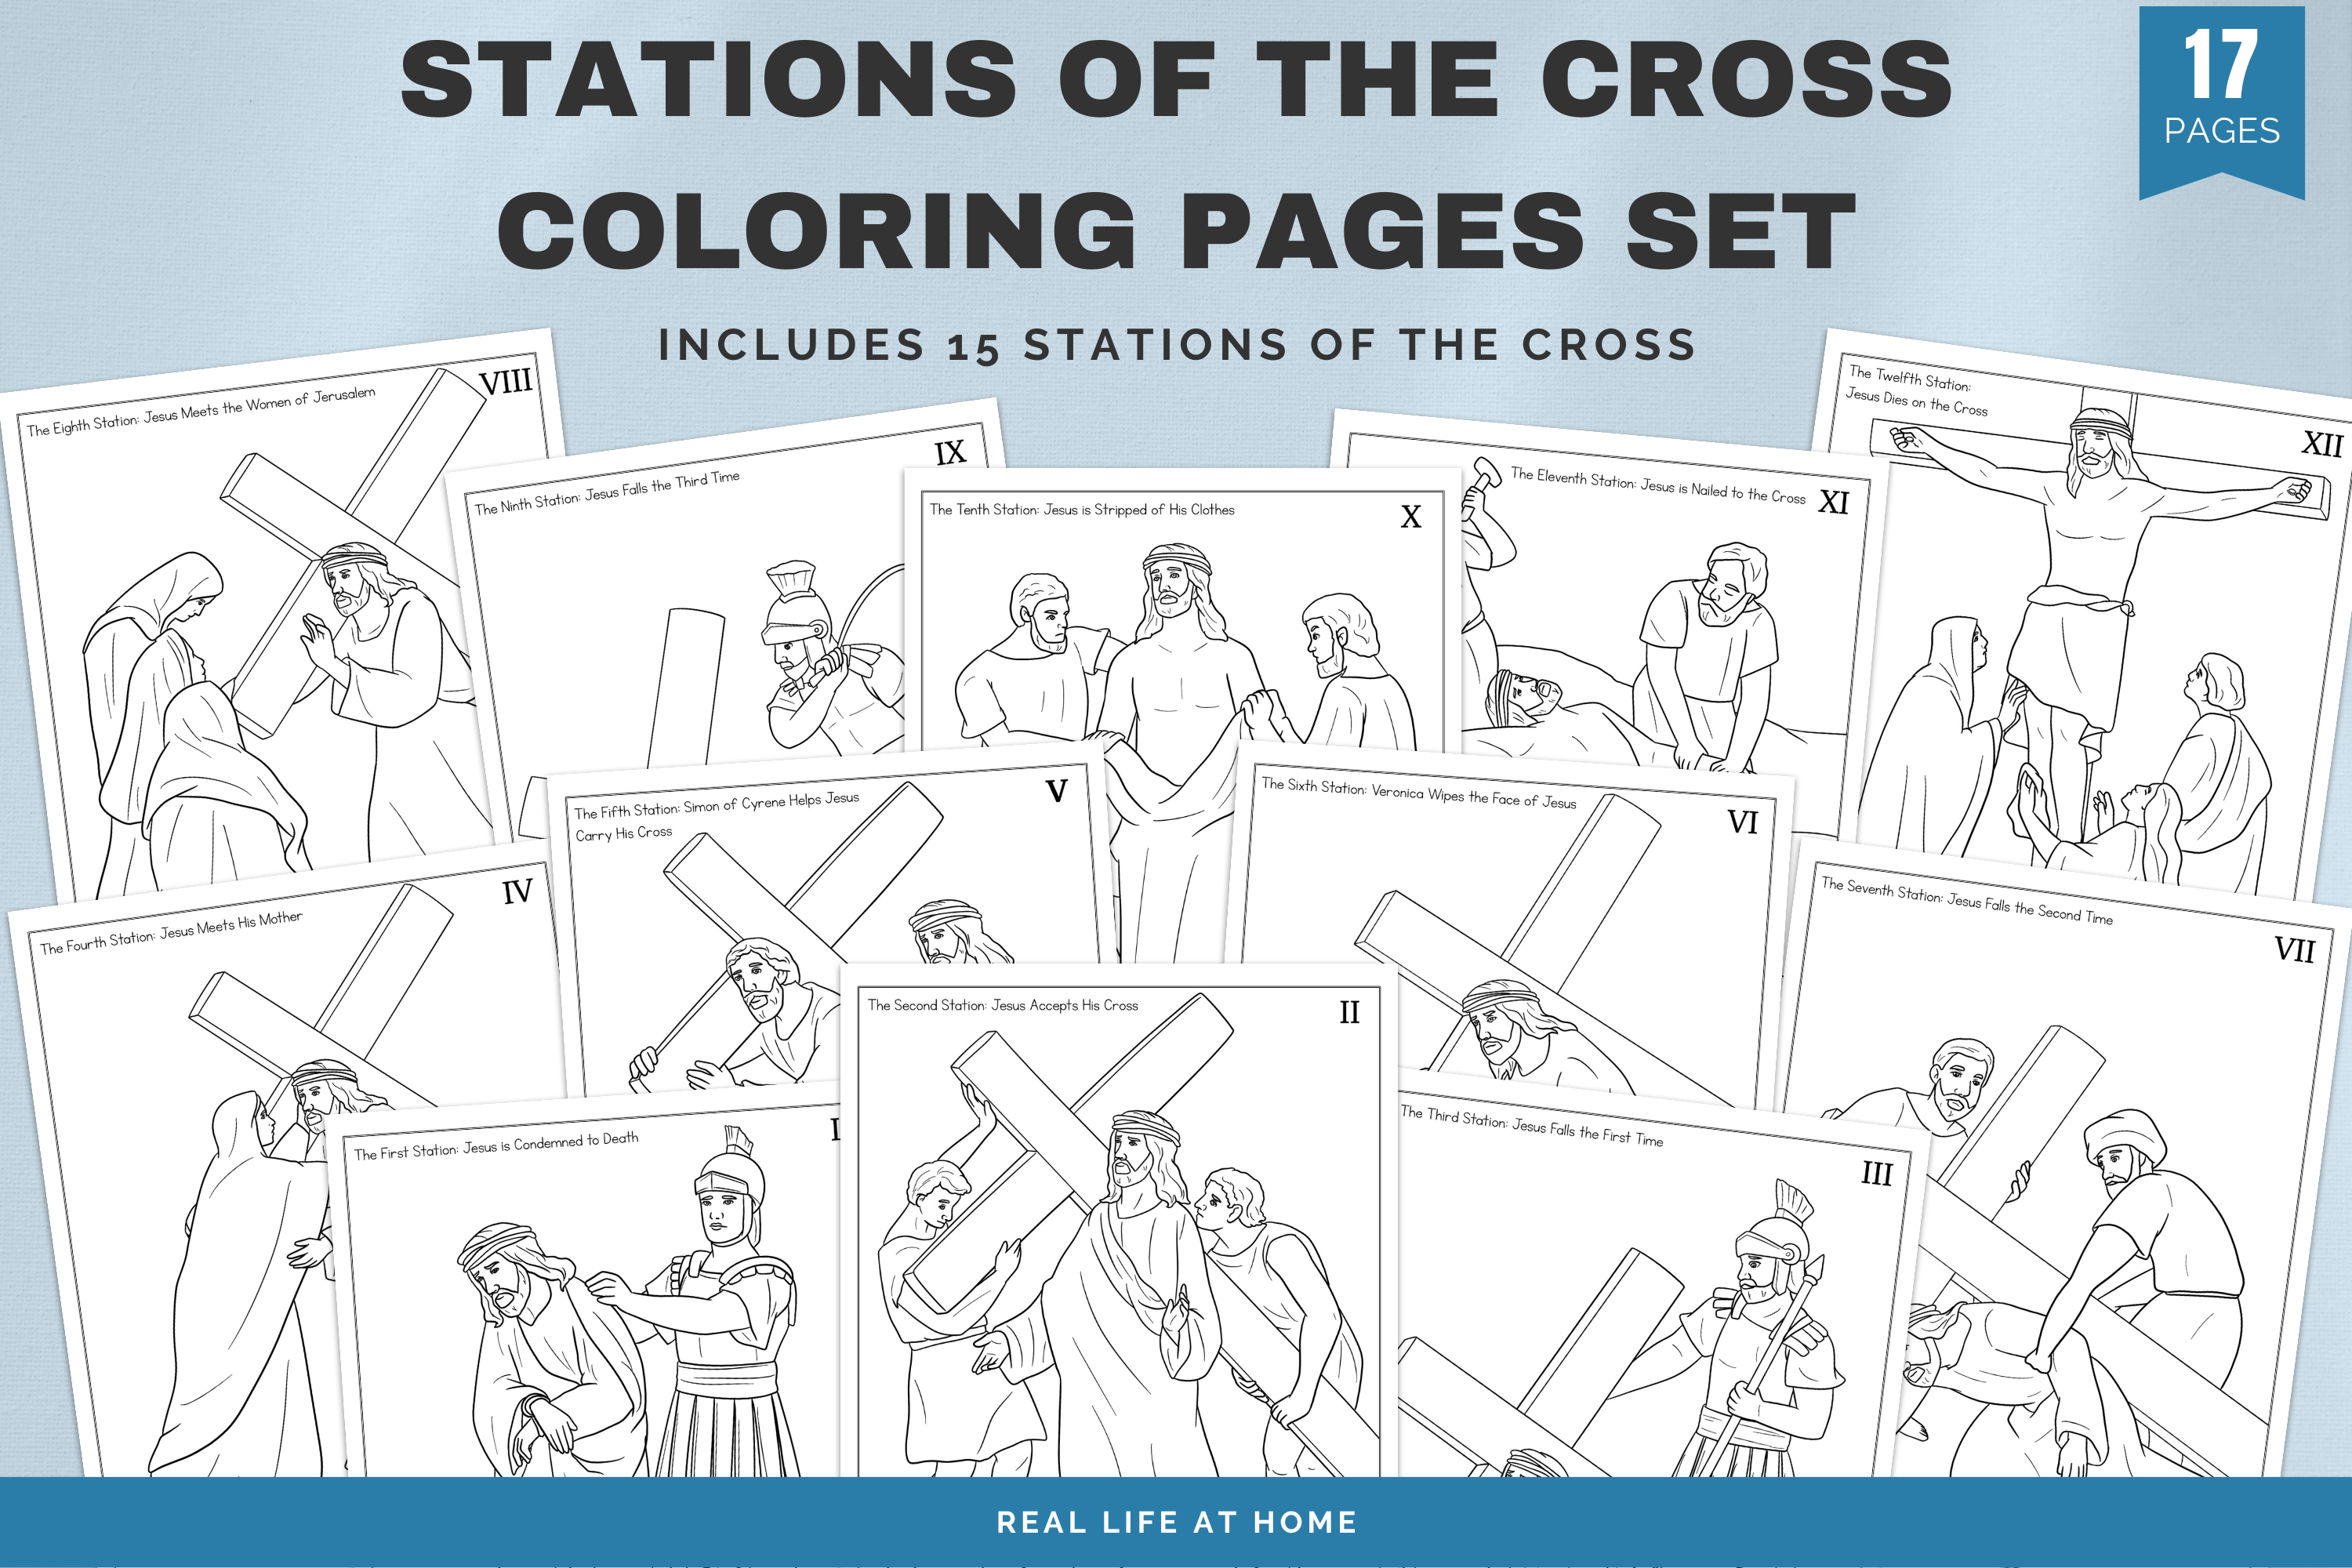 Stations of the Cross Coloring Pages on a Blue Background